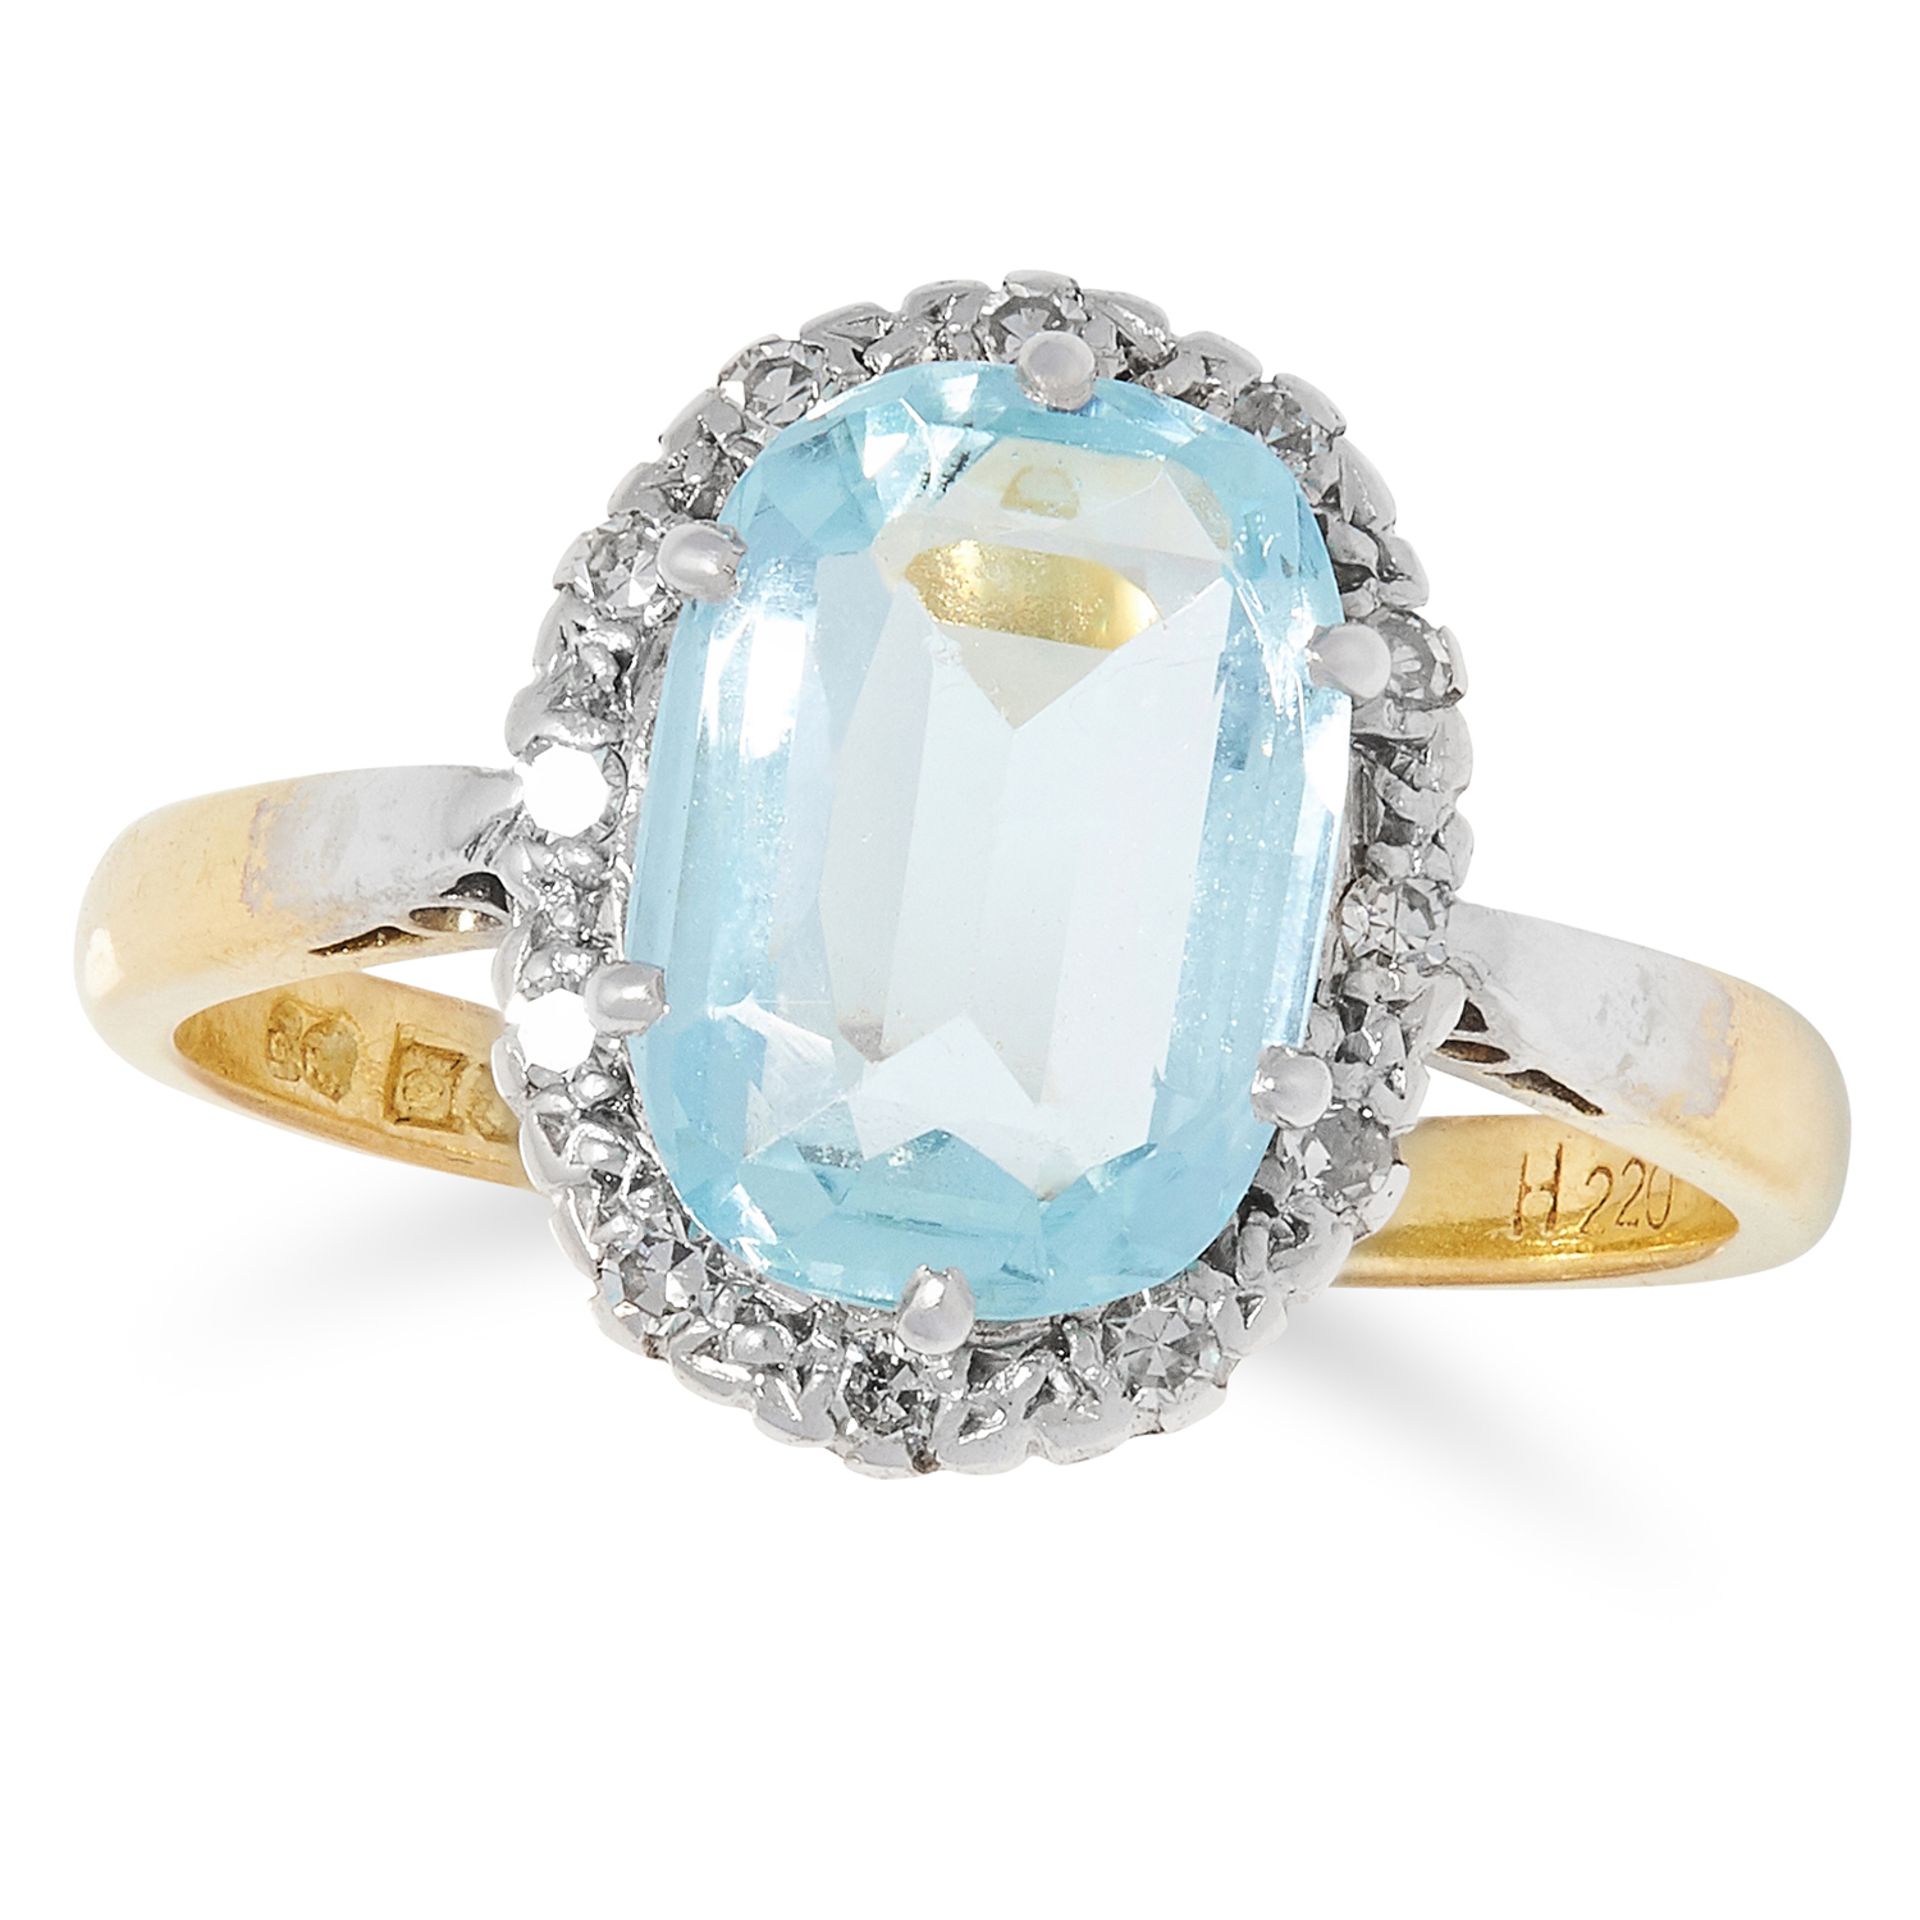 AQUAMARINE AND DIAMOND CLUSTER RING set with an oval cut aquamarine of approximately 2.42 carats